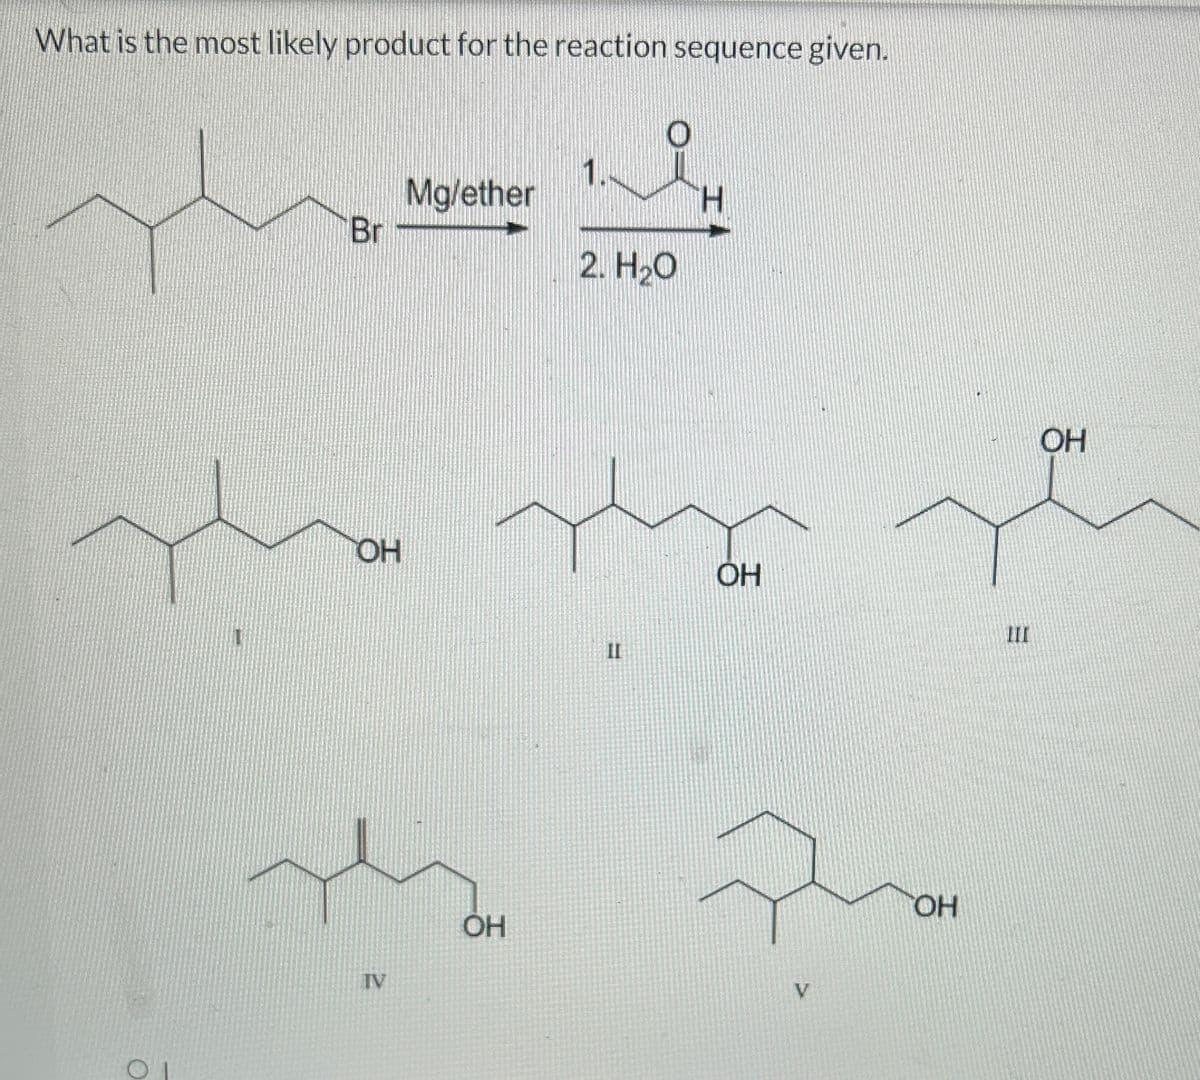 What is the most likely product for the reaction sequence given.
Br
ОН
IV
Mg/ether
ОН
2. H2O
II
OH
ОН
3
OH